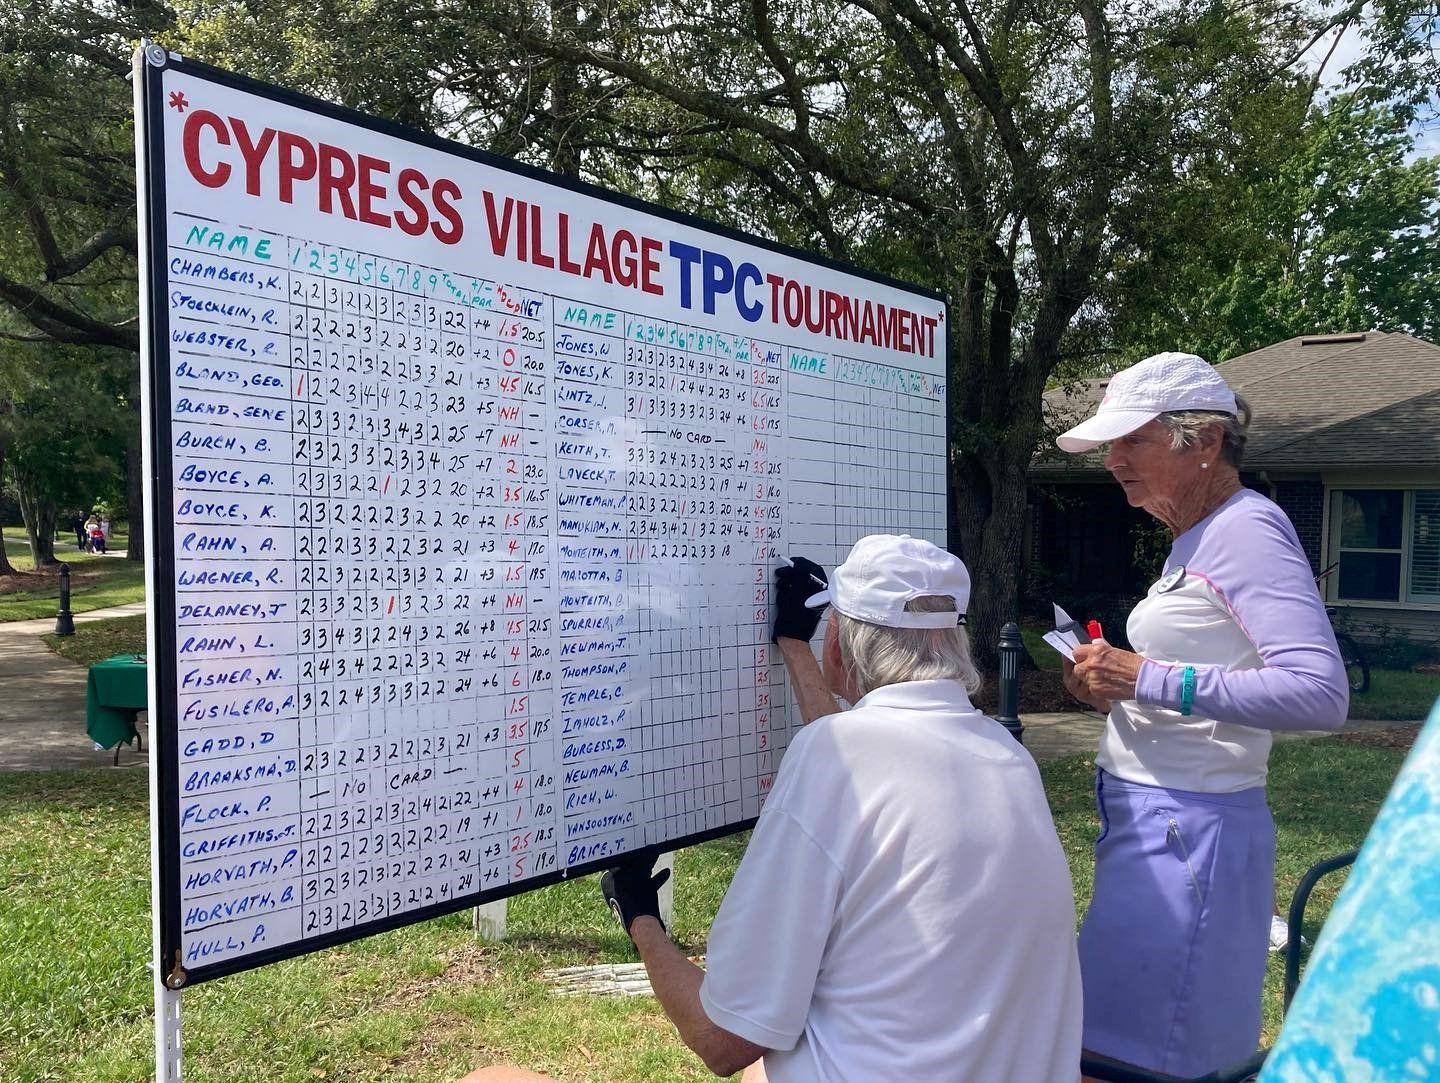 Cypress Village Putters club members Richard and Kate keep score during the Fifth Annual Putters Tournament.